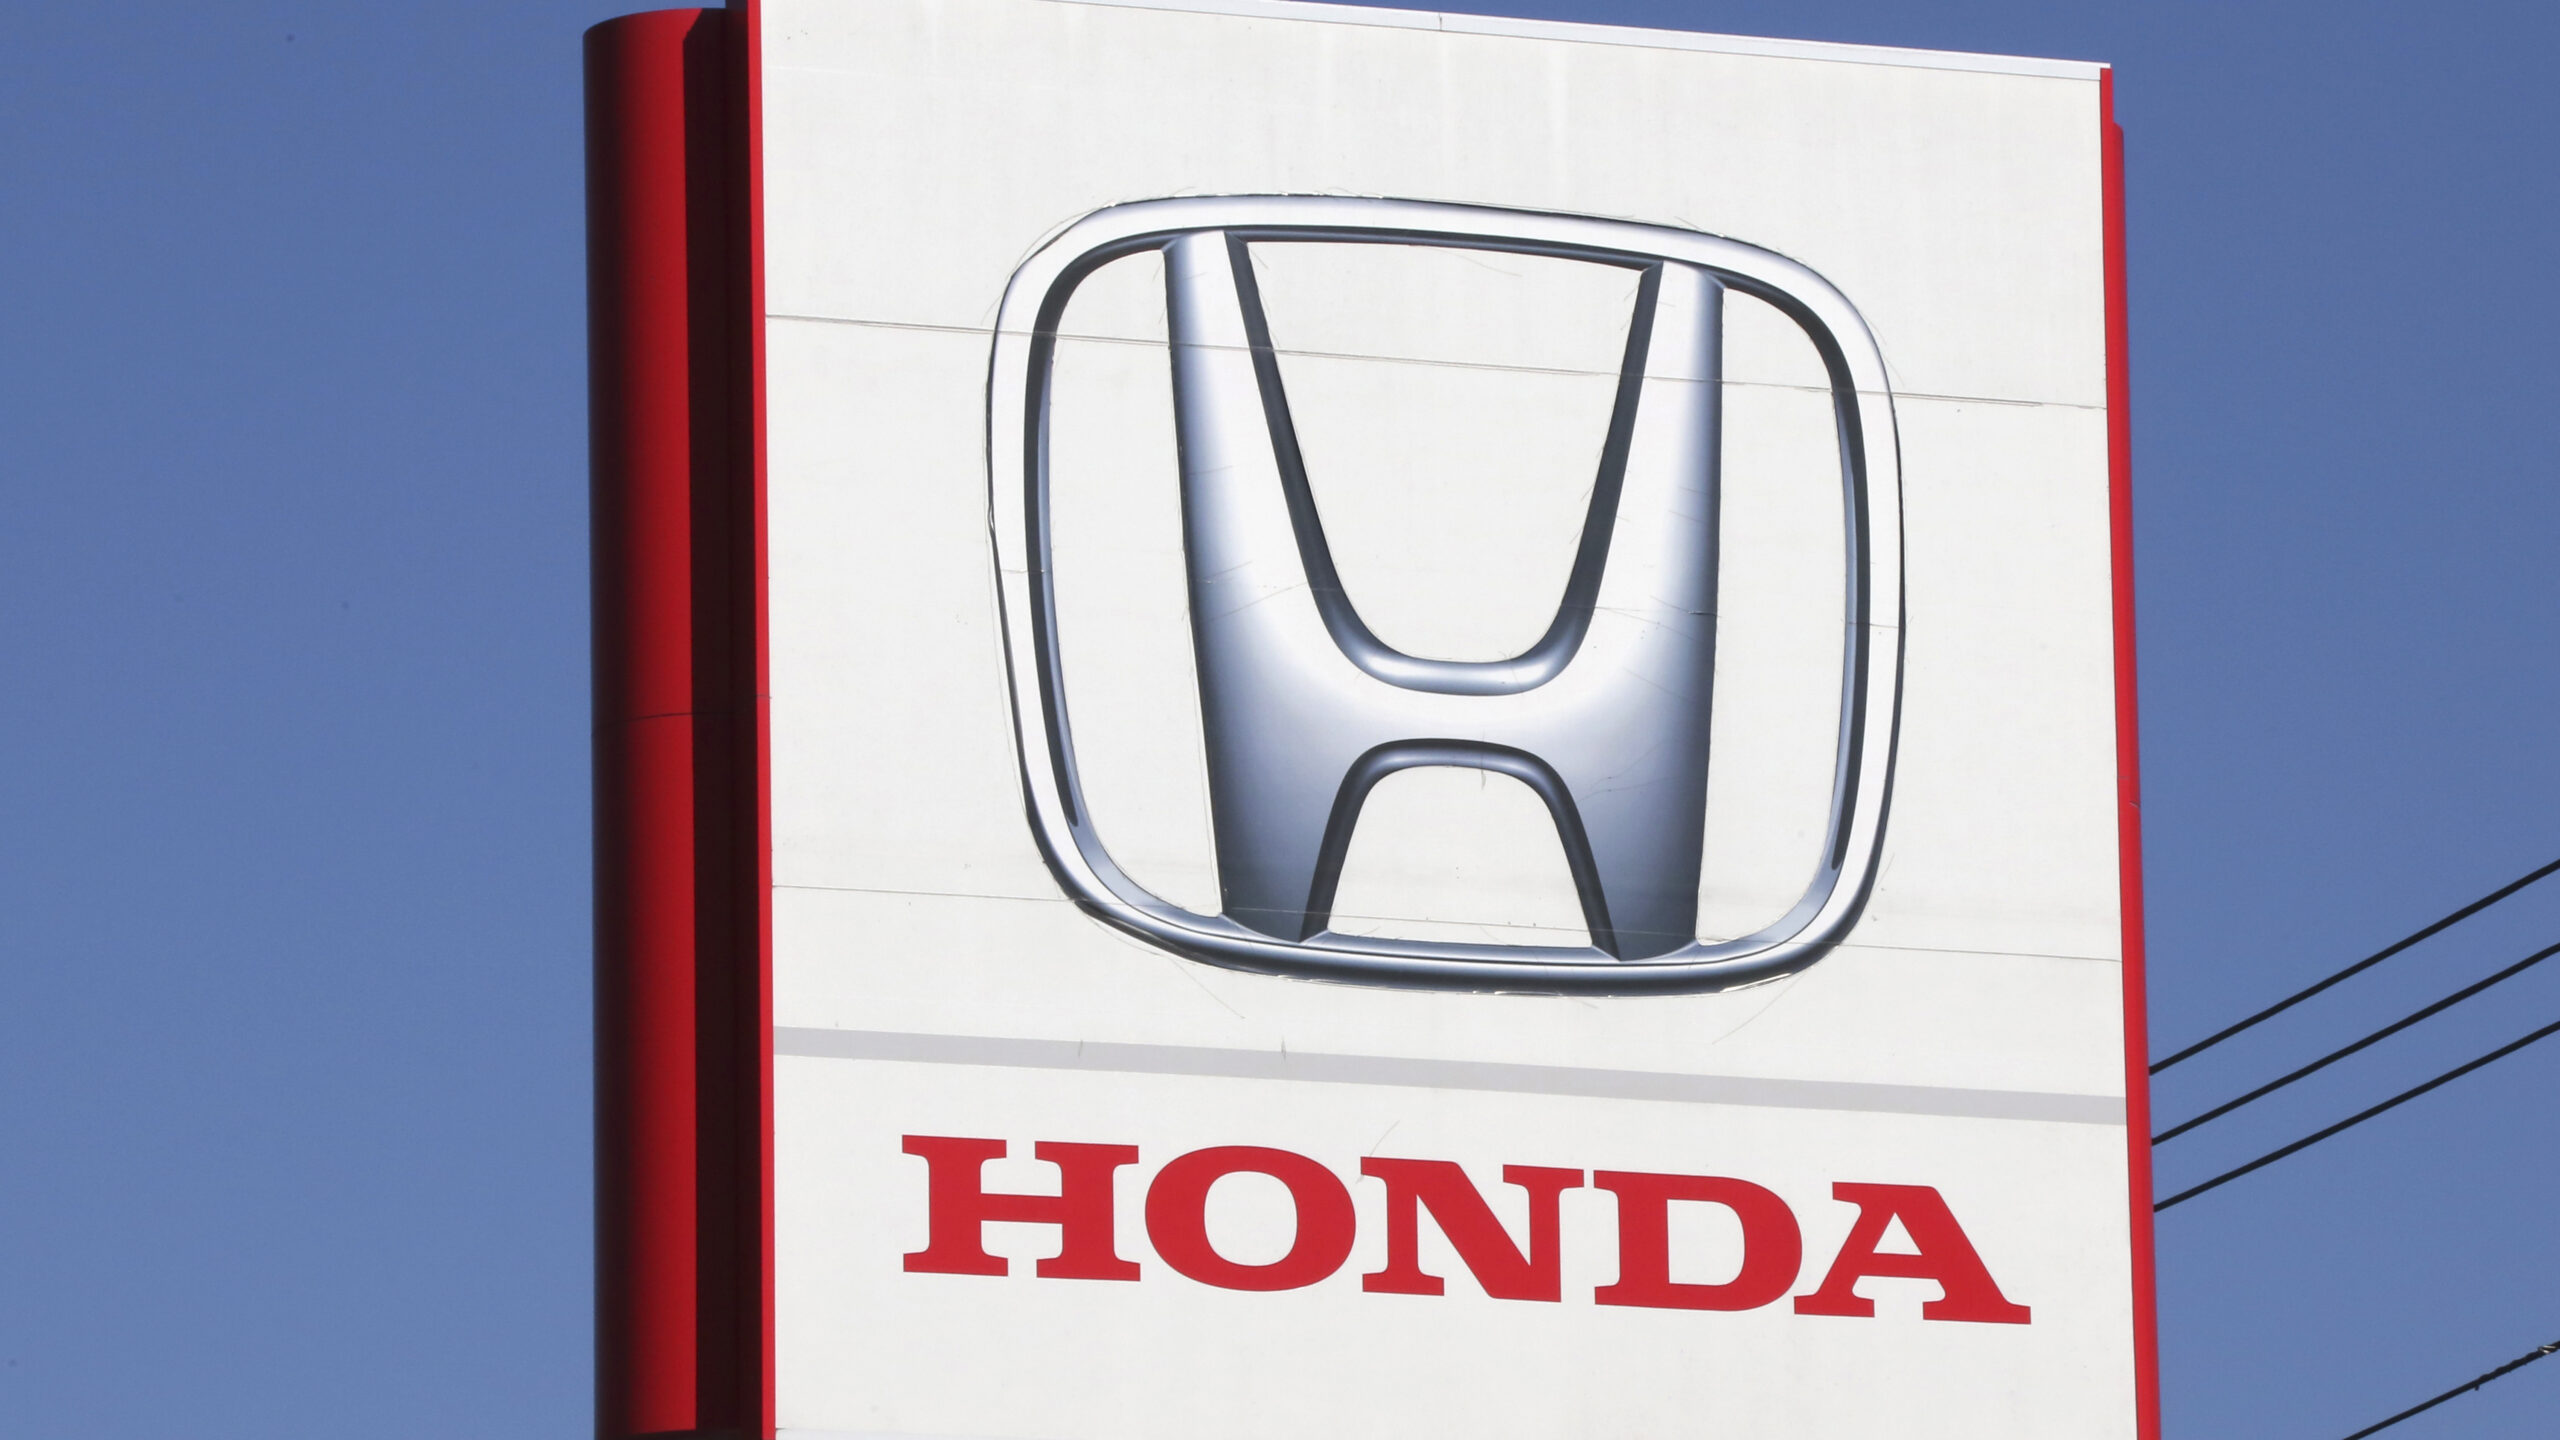 More than 2.5 million Honda and Acura vehicles are recalled for a fuel pump defect